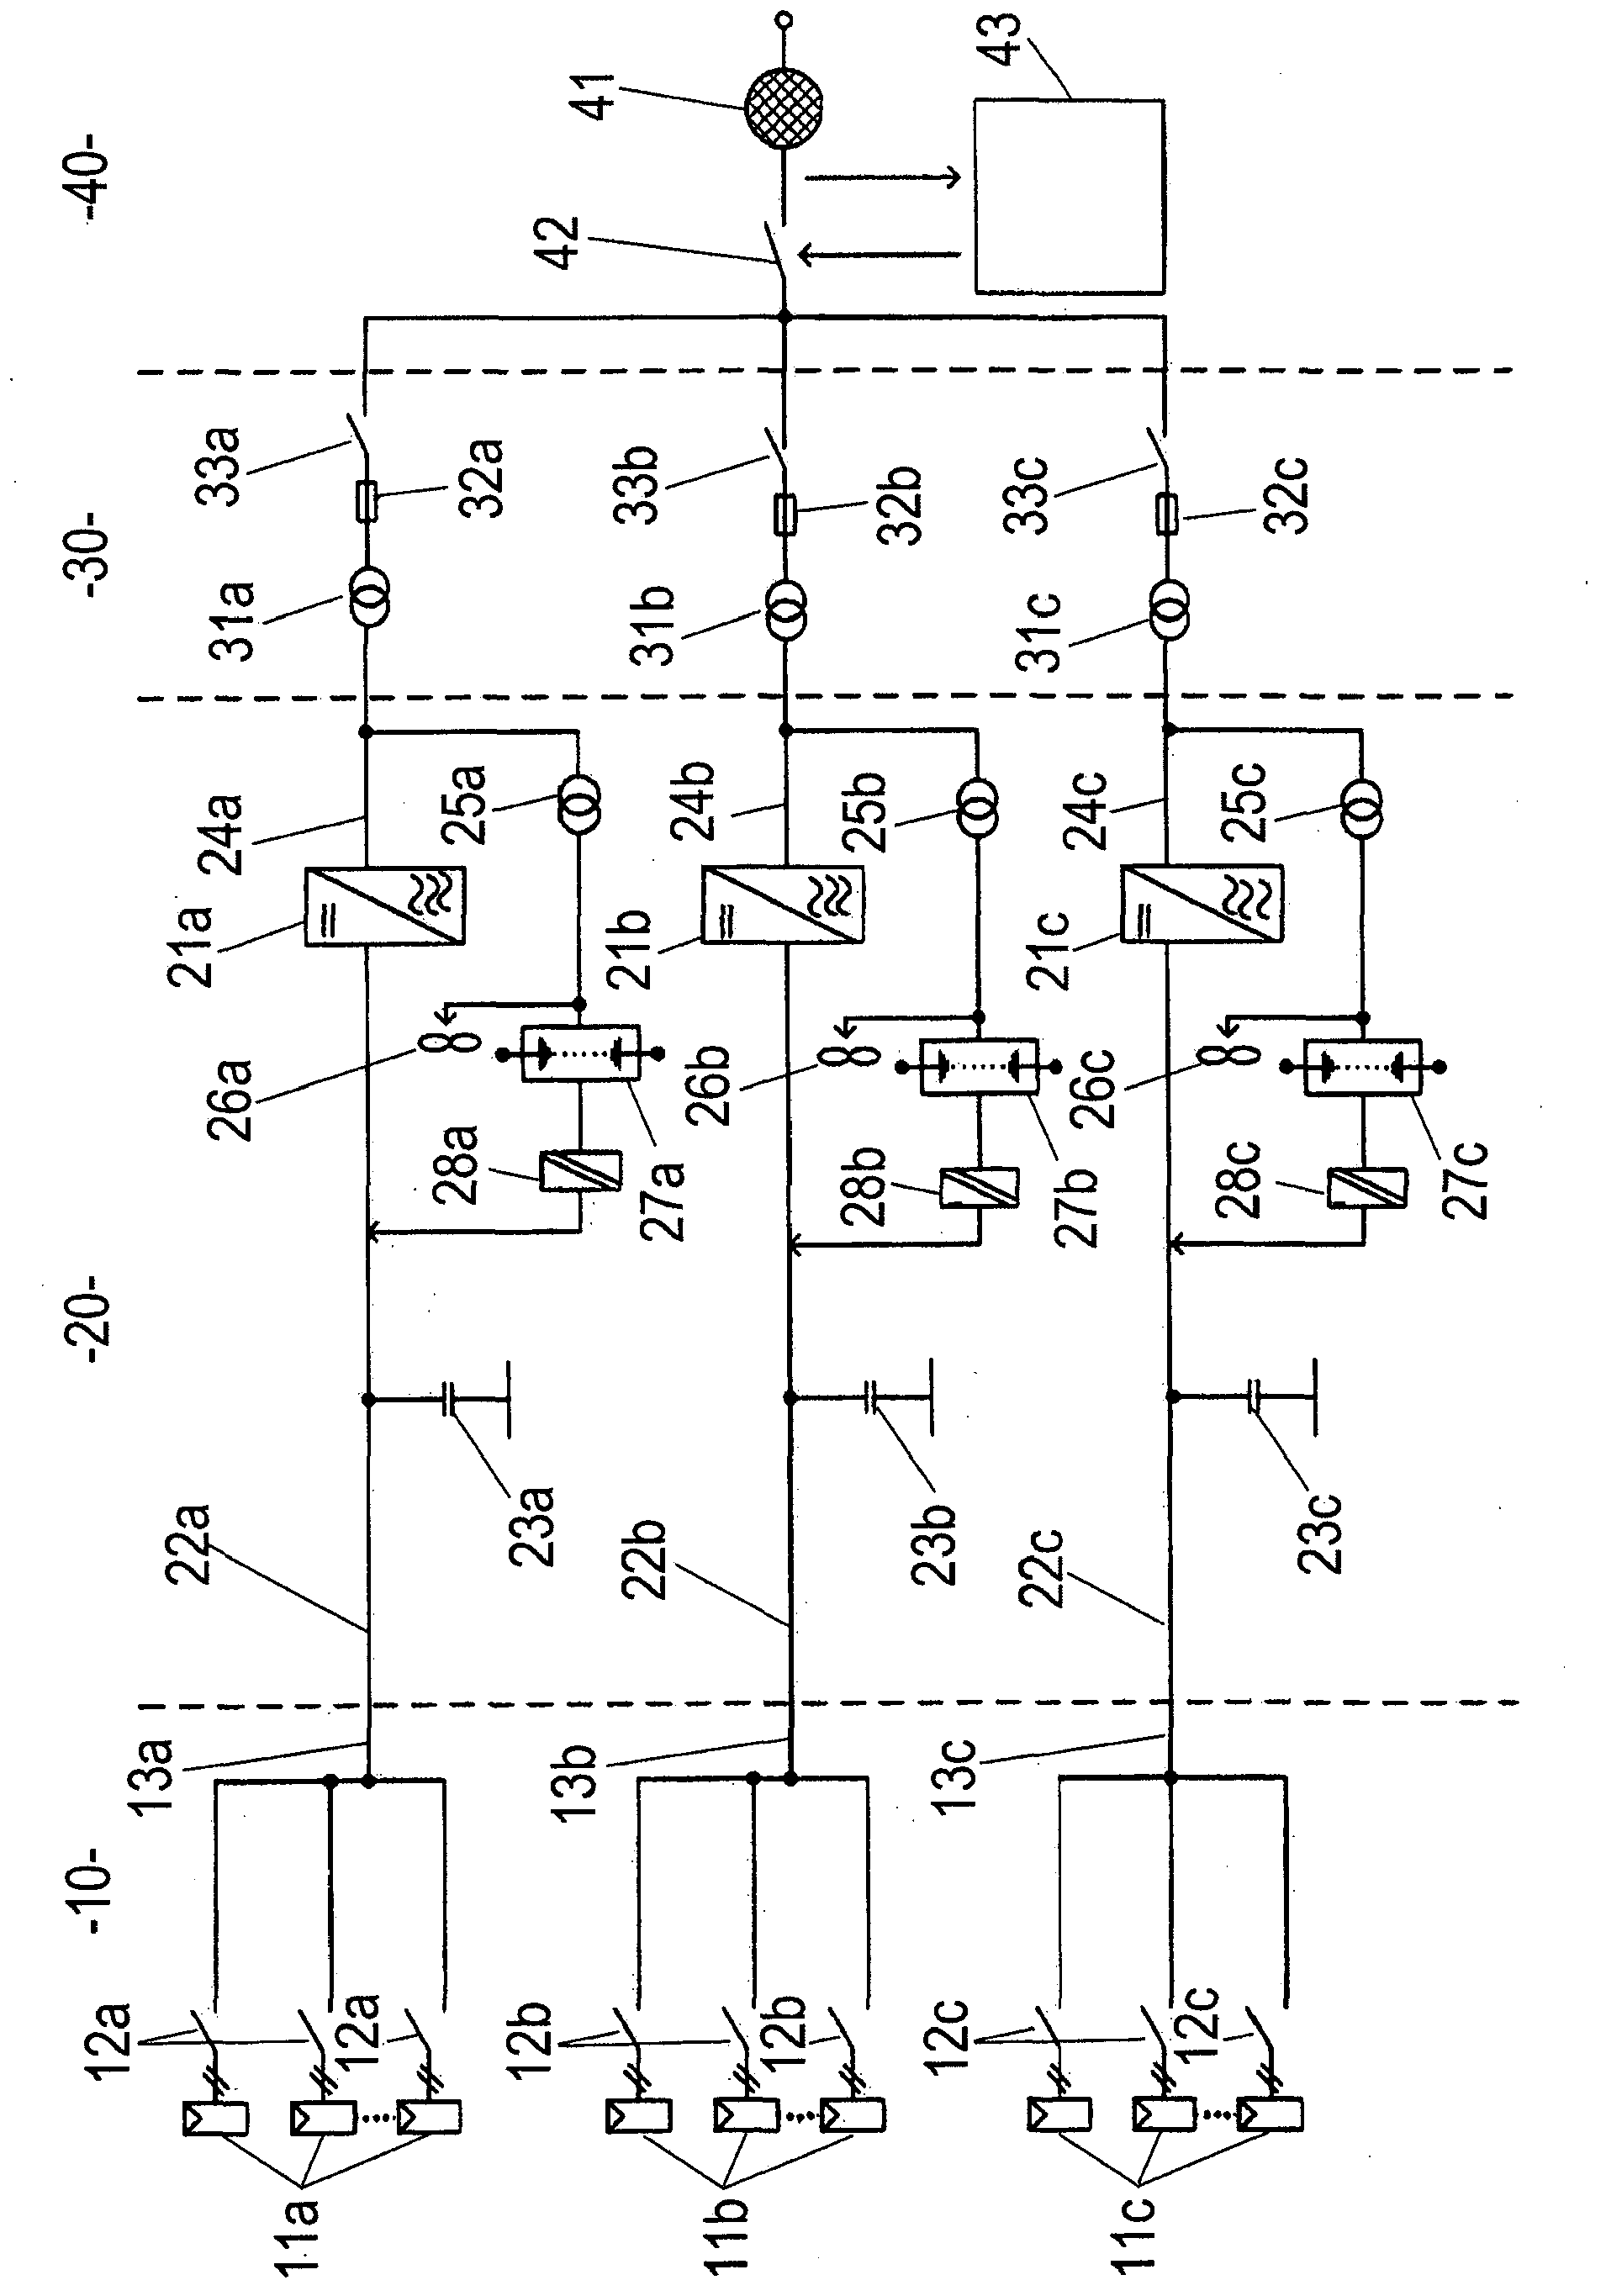 Method for operation of a photovoltaic installation for feeding electrical power into a medium-voltage power supply grid